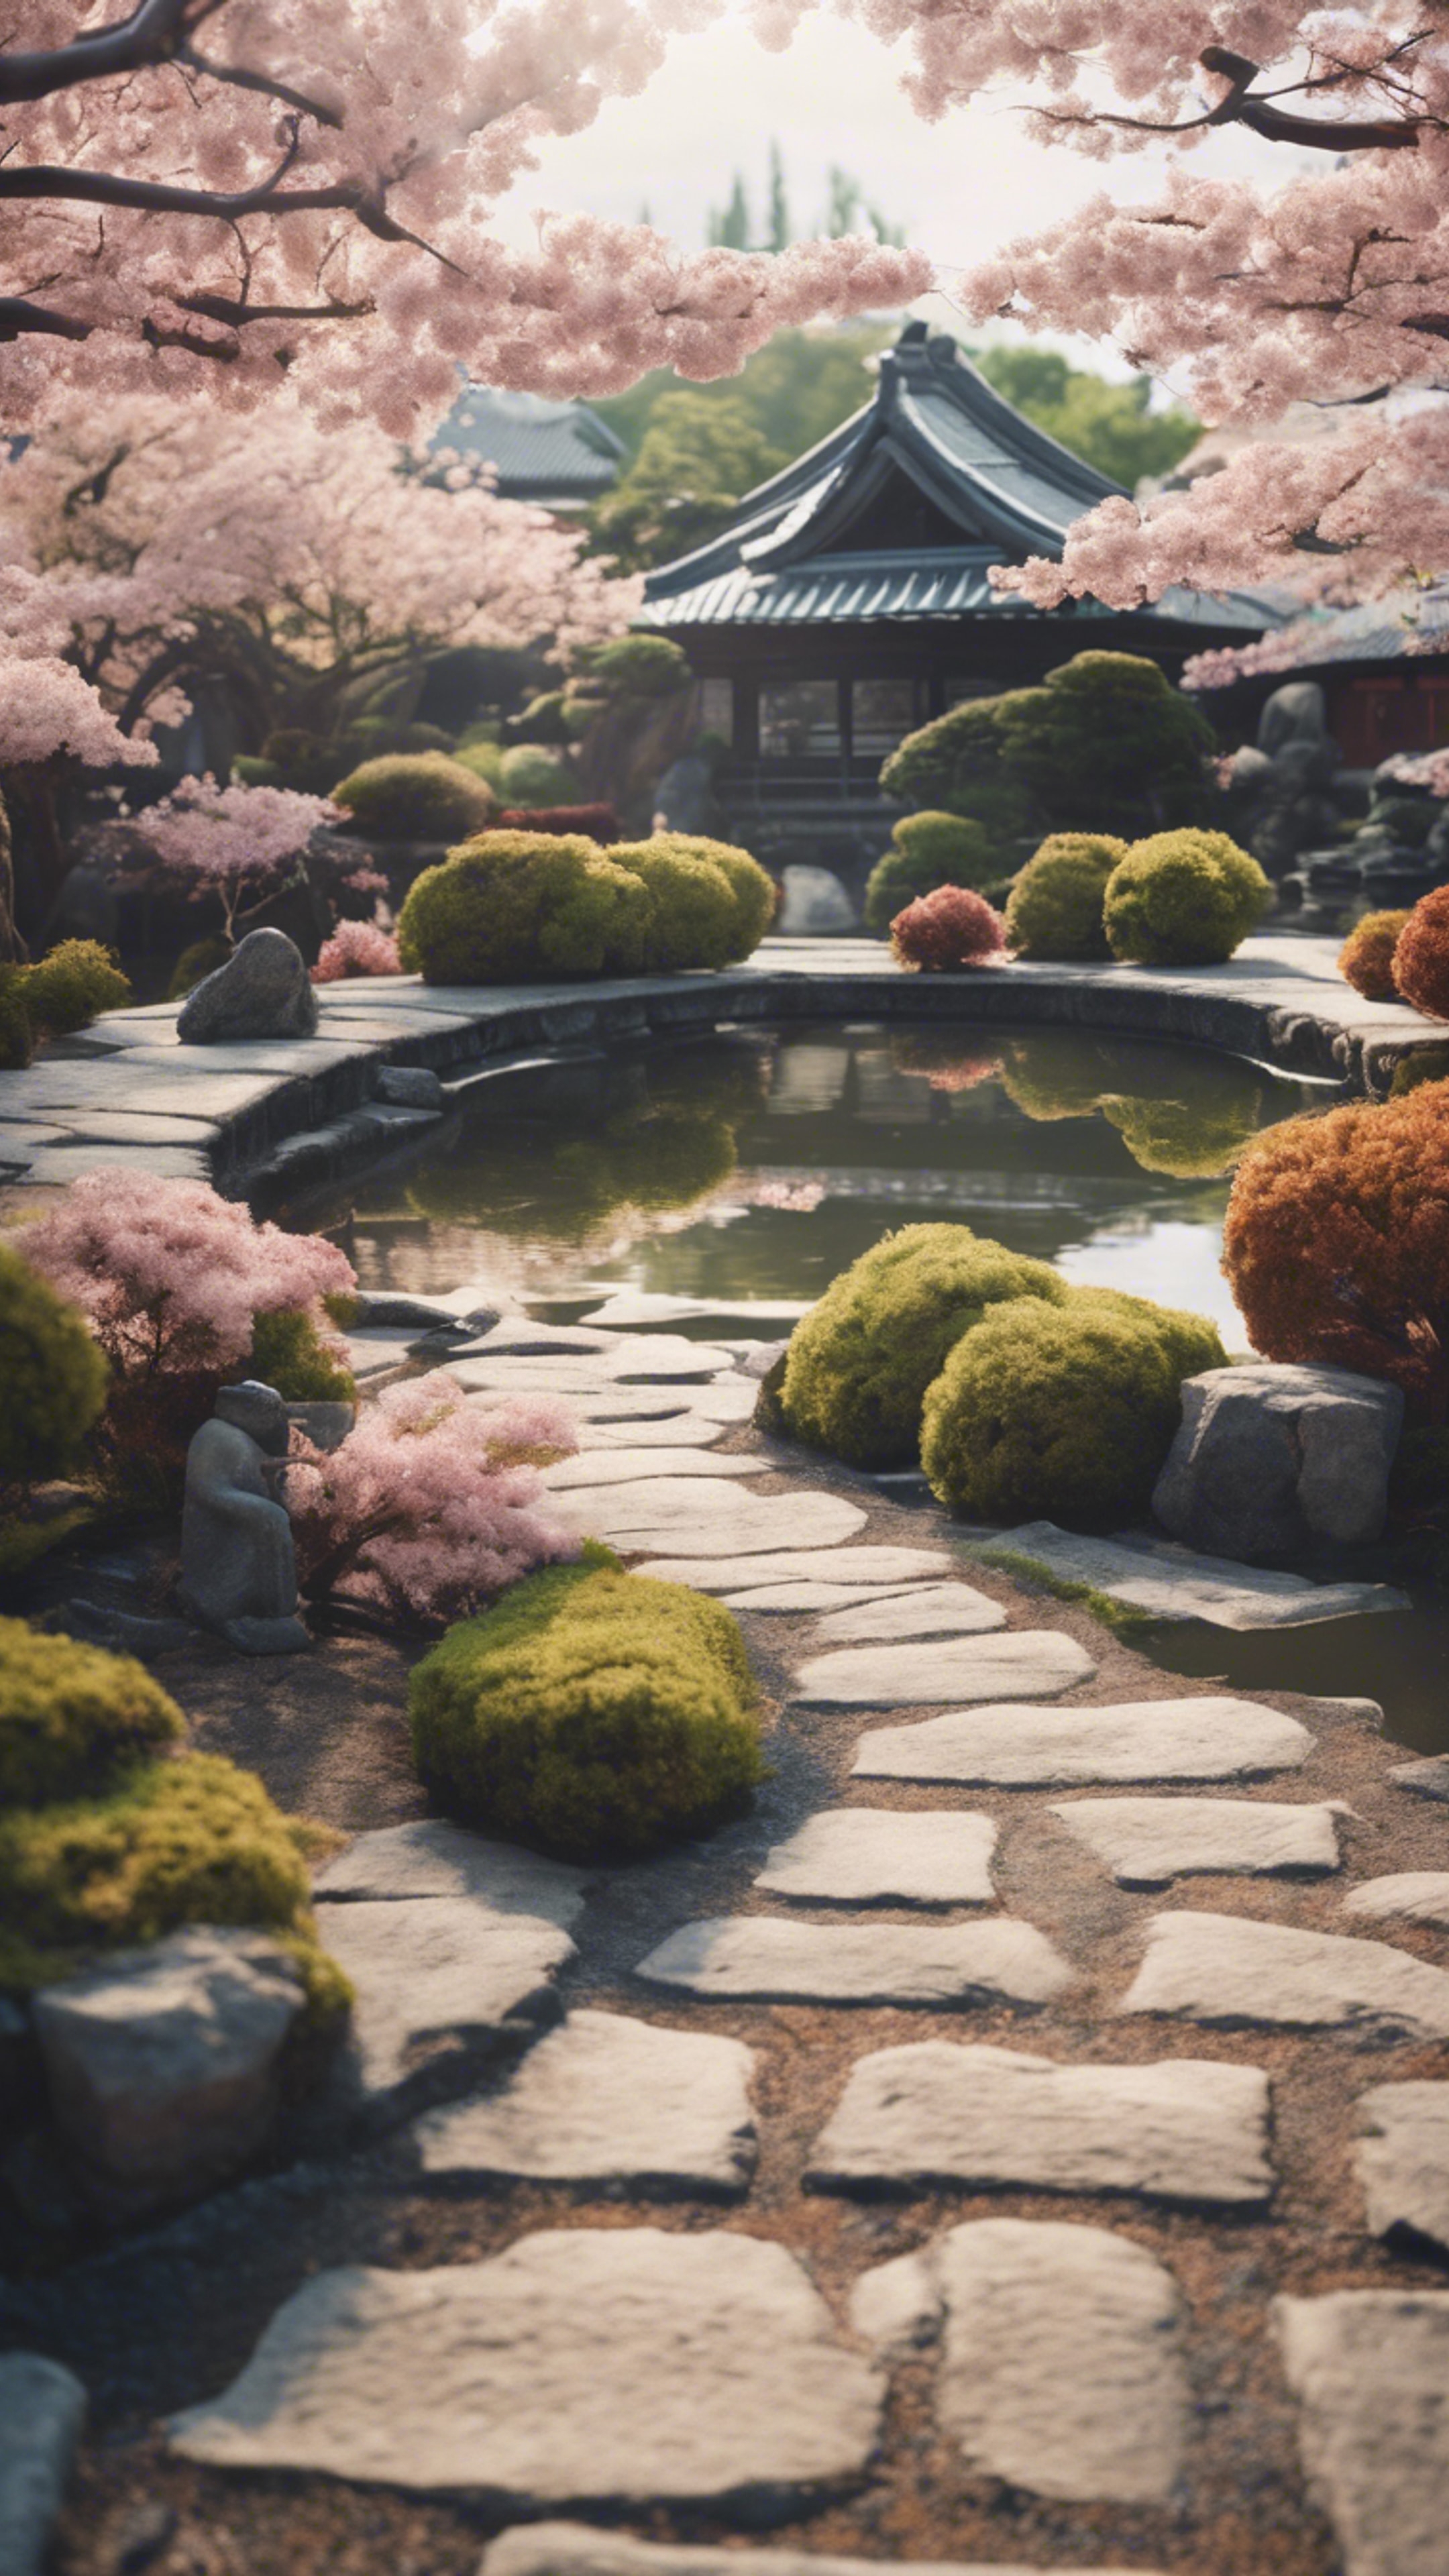 A zen Japanese garden dotted with cherry blossom trees, surrounded by stone paths and peaceful koi ponds.壁紙[3f7f565f053041458004]